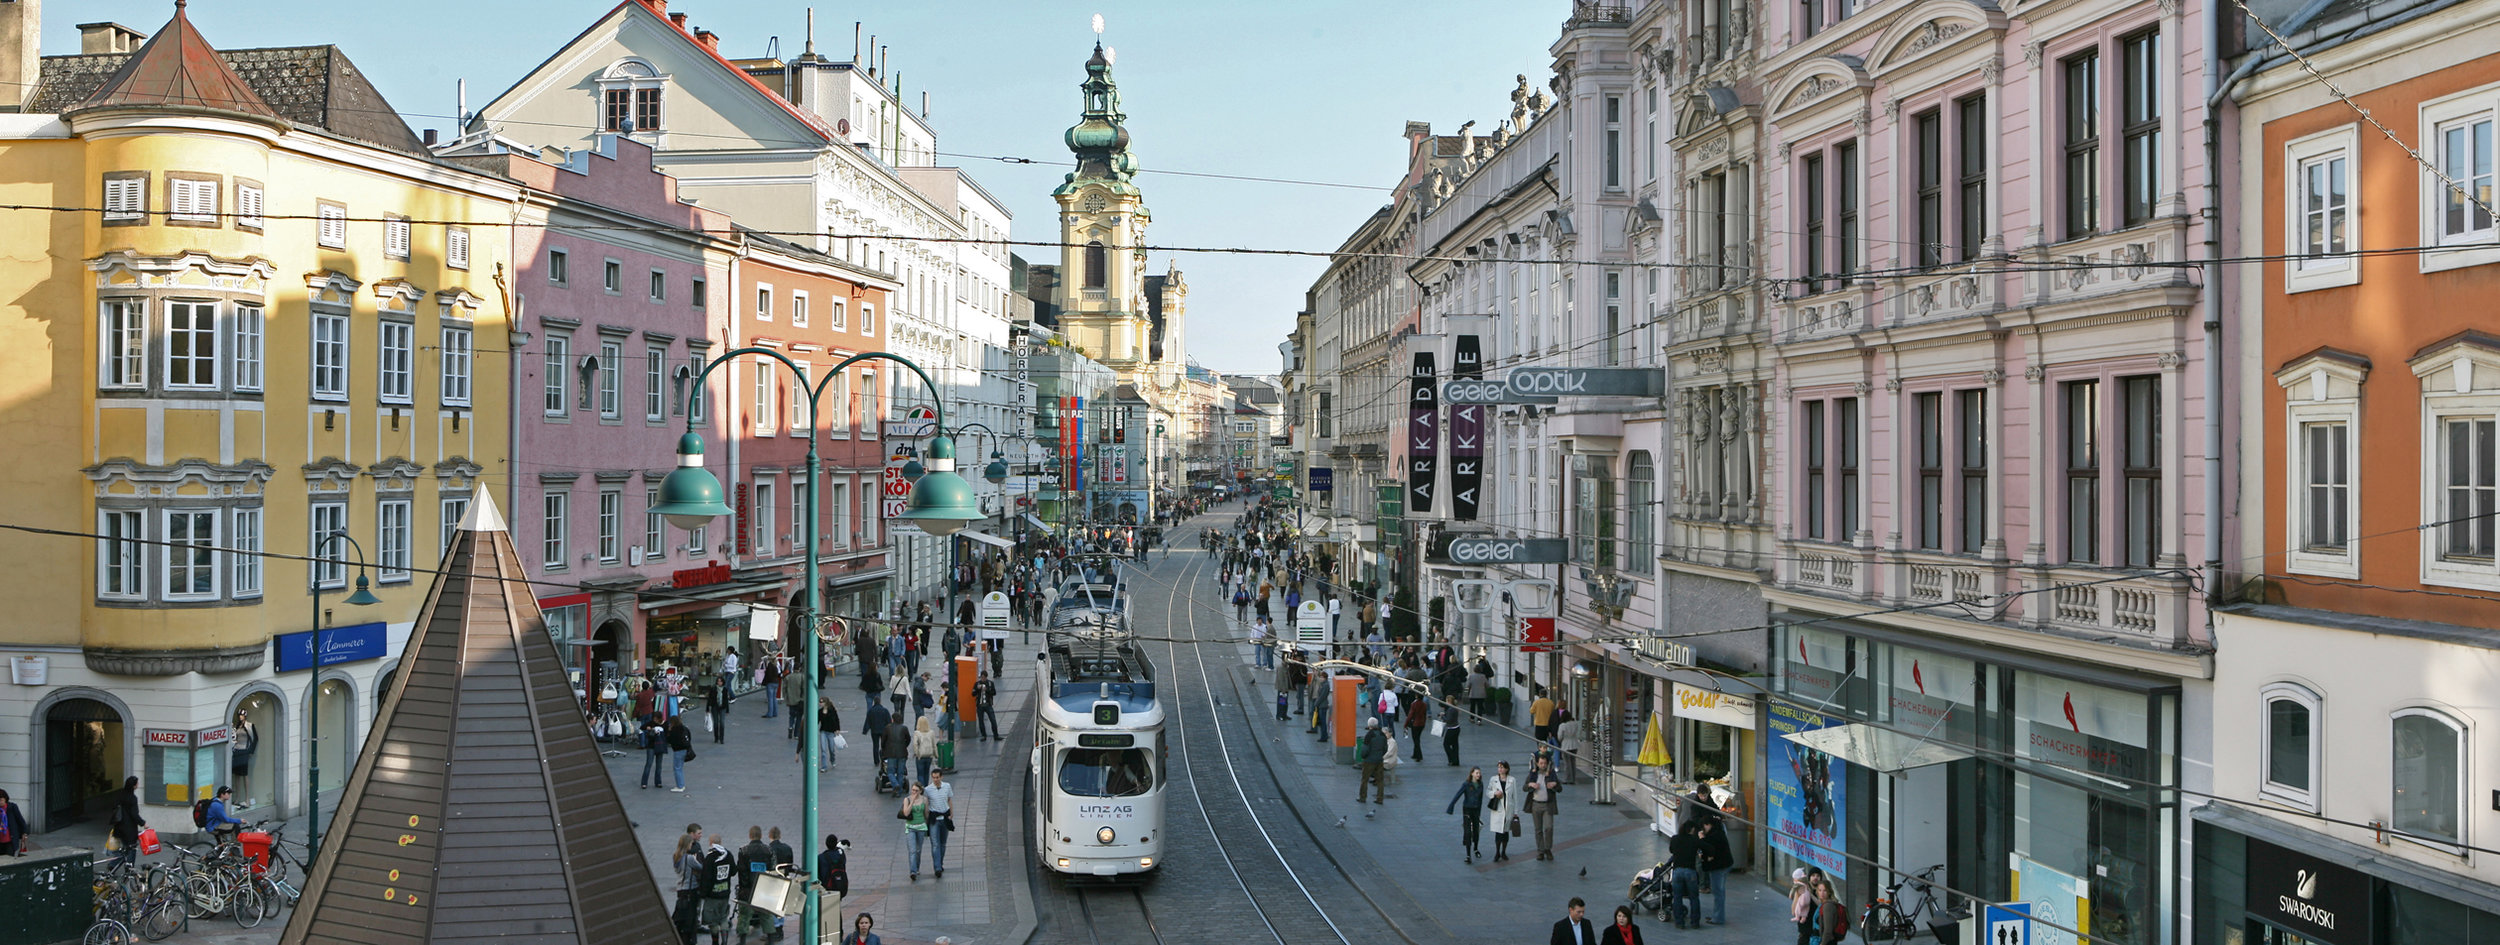  A view of Linz, Austria-- the proposed location of Hitler's cultural capitol 